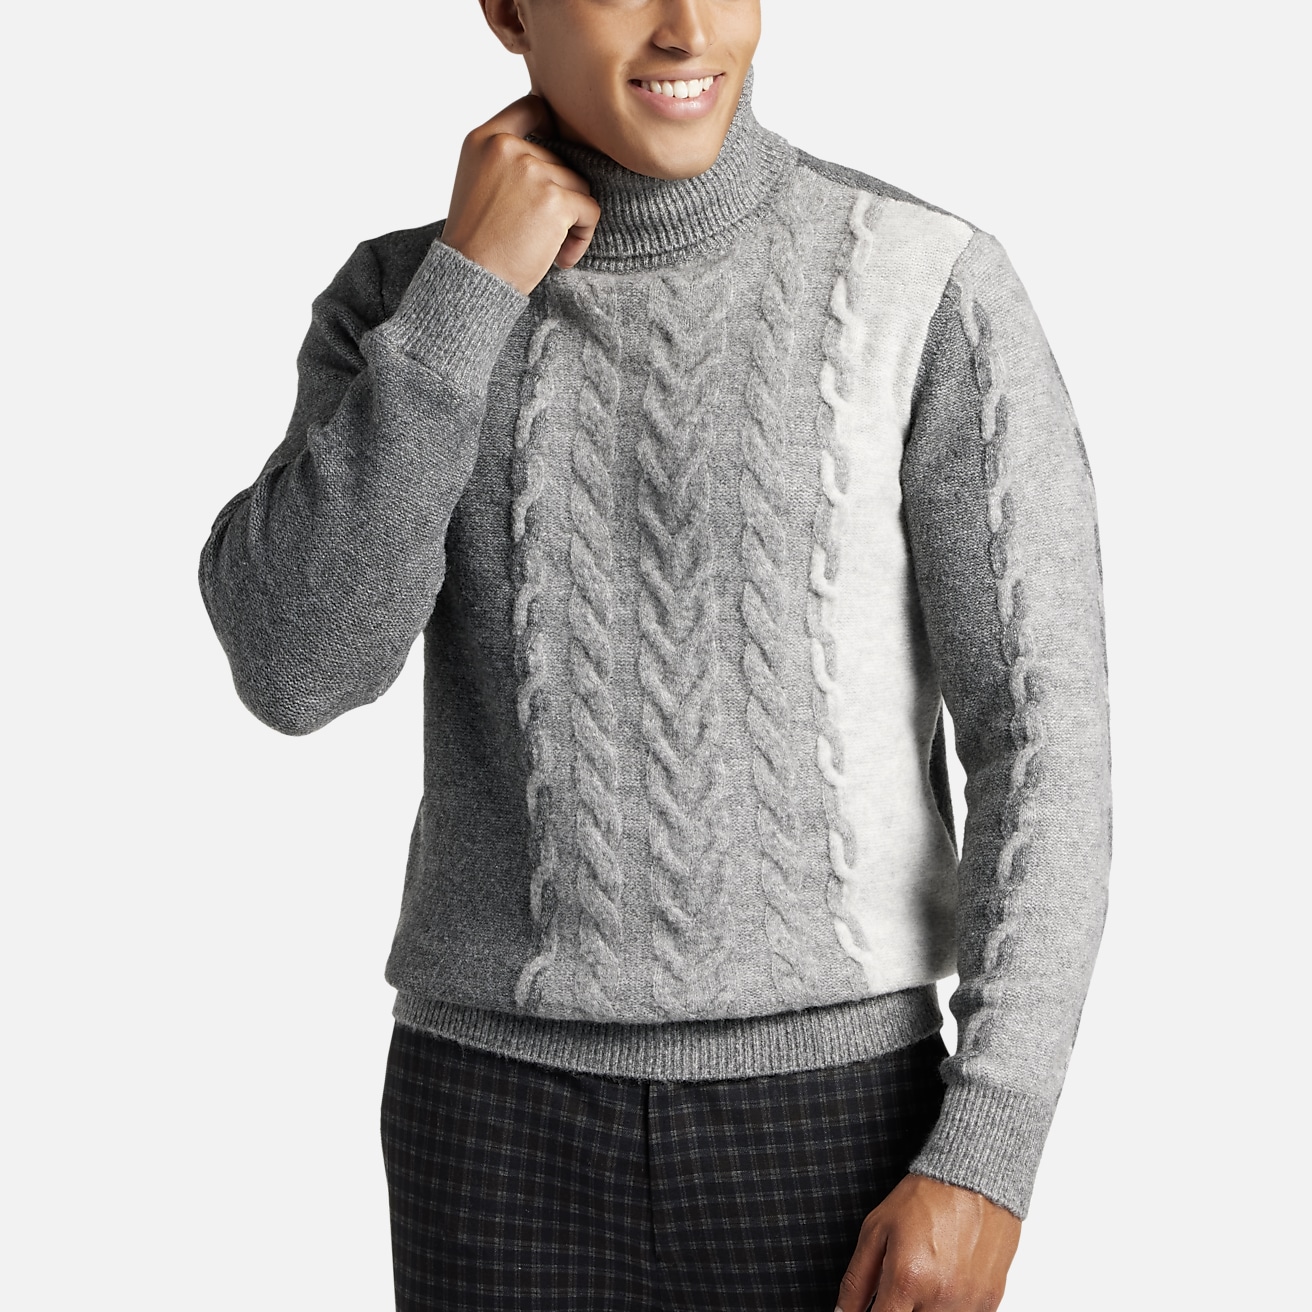 Paisley & Gray Slim Fit Tri-Color Cable Knit Turtleneck Sweater